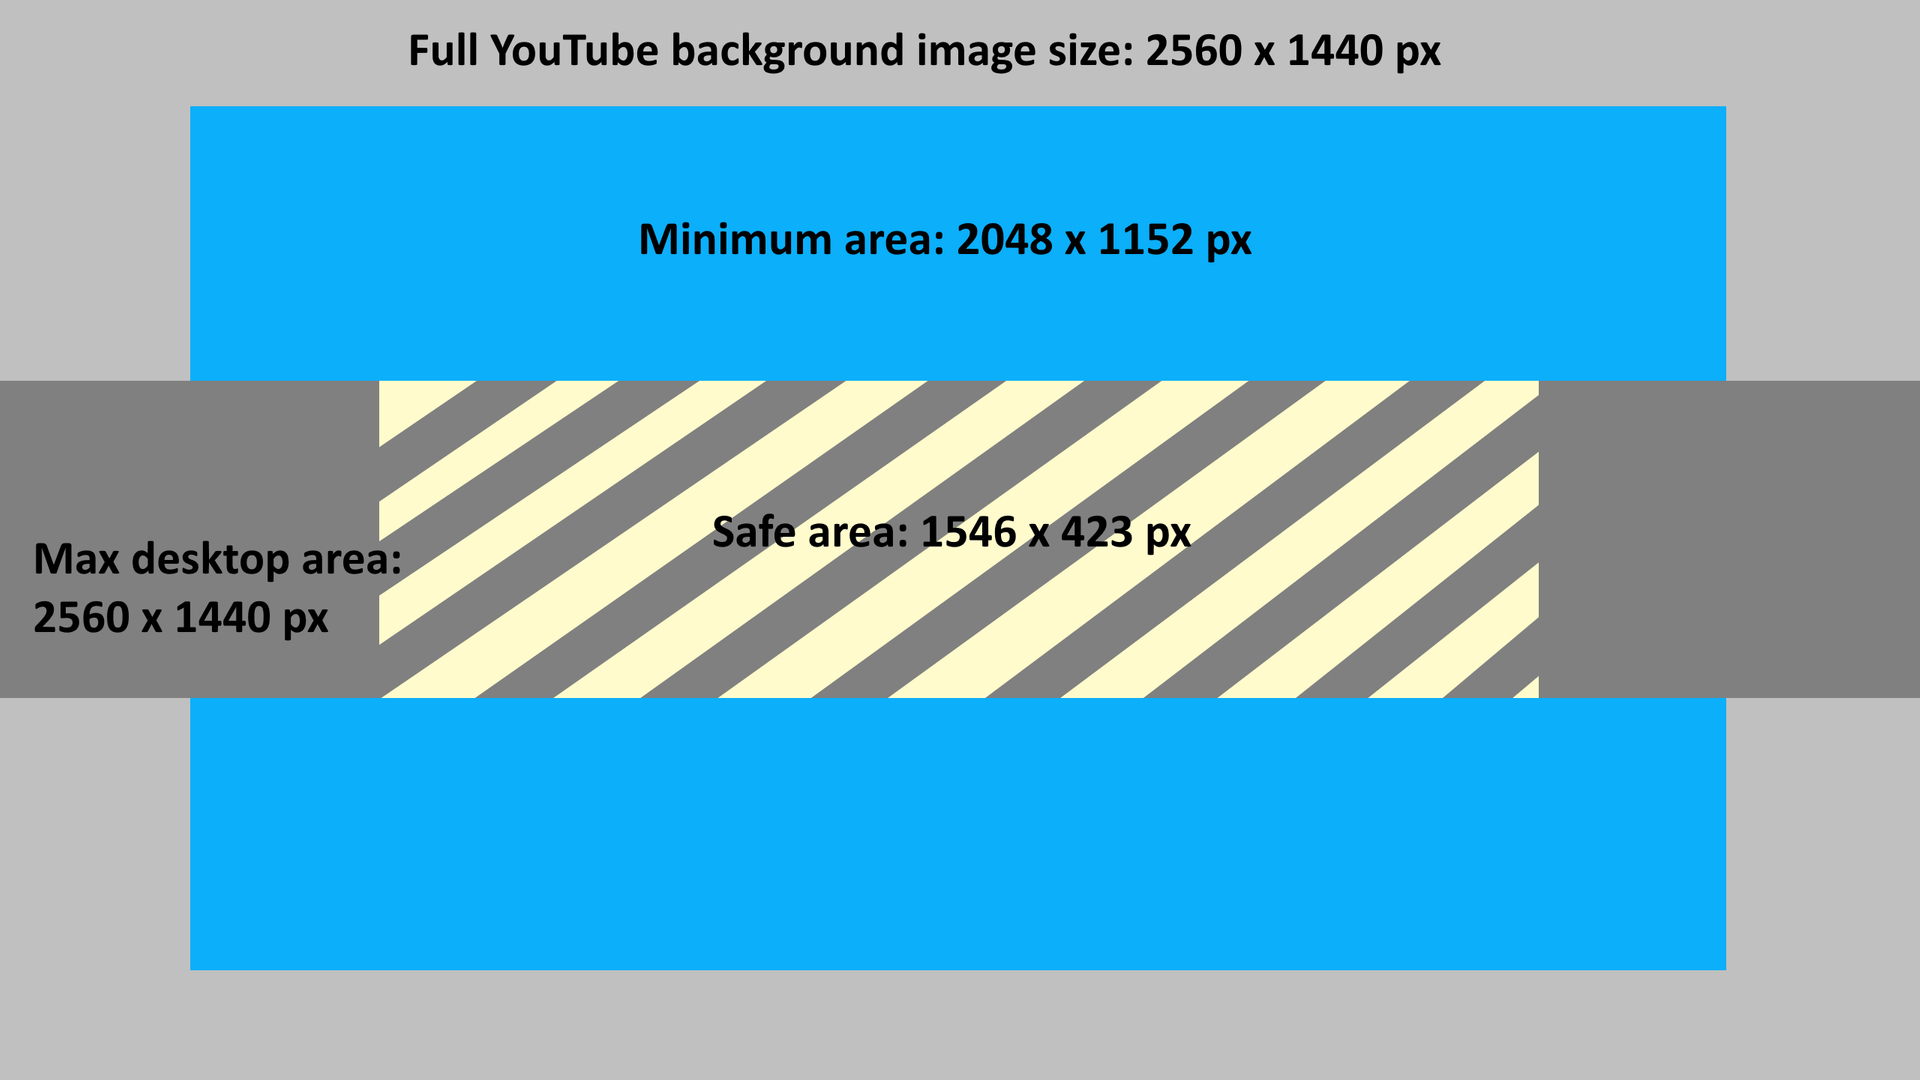 The Best Youtube Banner Size In 2020 + Best Practices For With Youtube Banner Size Template